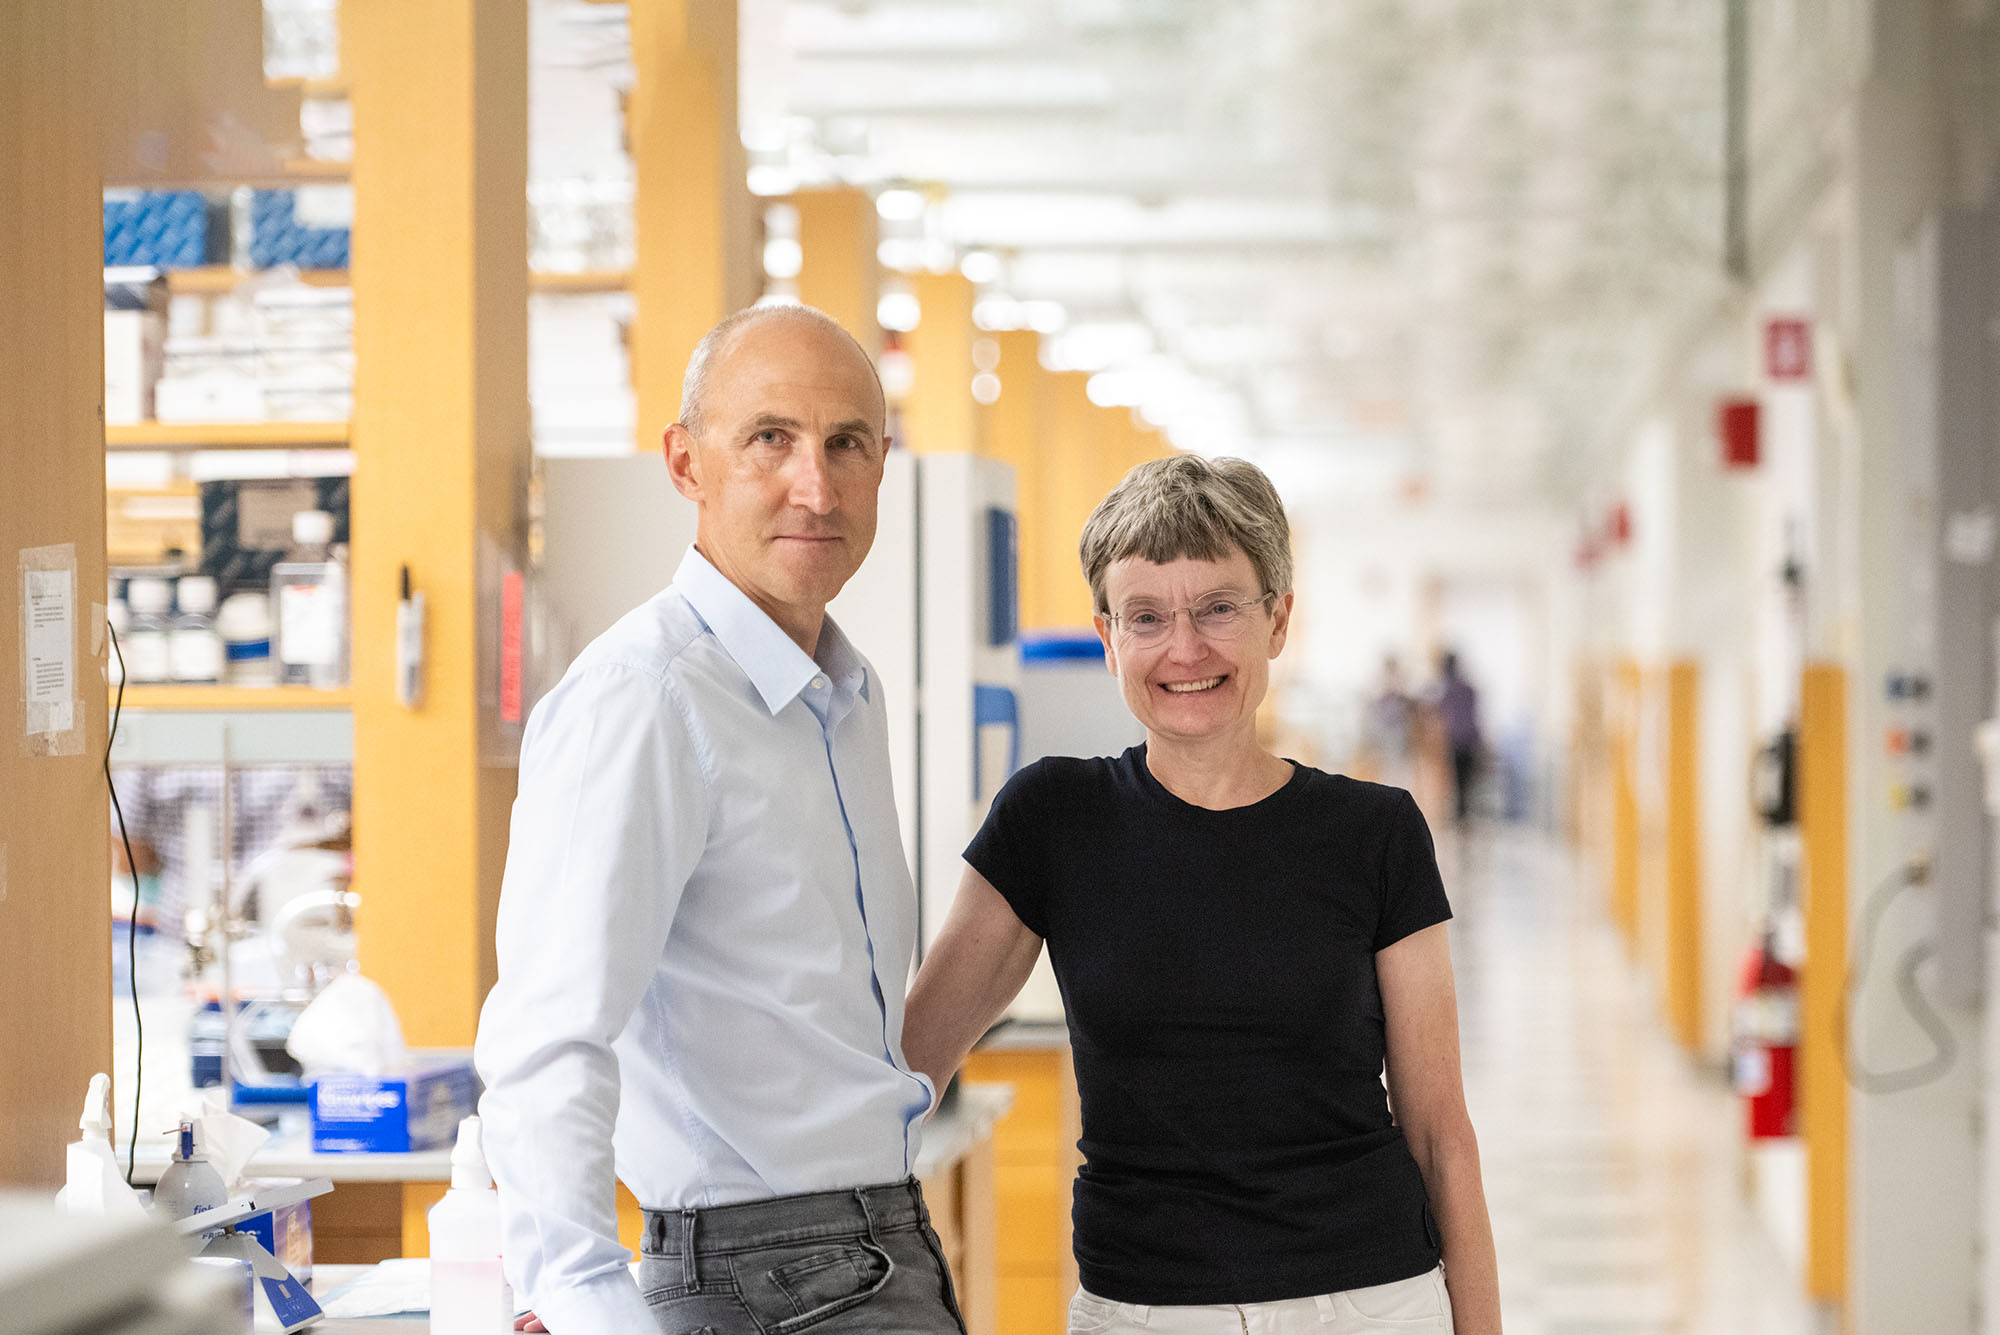 Photo: Ruslan Afasizhev (left), a tall whie man with a balding, shaved grey hair and wearing a light blue collared shirt and dark grey jeans, and Inna Afasizheva, a white woman with short grey-brown hair and wearing a black short-sleeved shirt and white jeans, pose in a brightly lit lab. Ruslan leans slightly back against a lab worktop while Inna poses with one hand one the same worktop behind Ruslan.